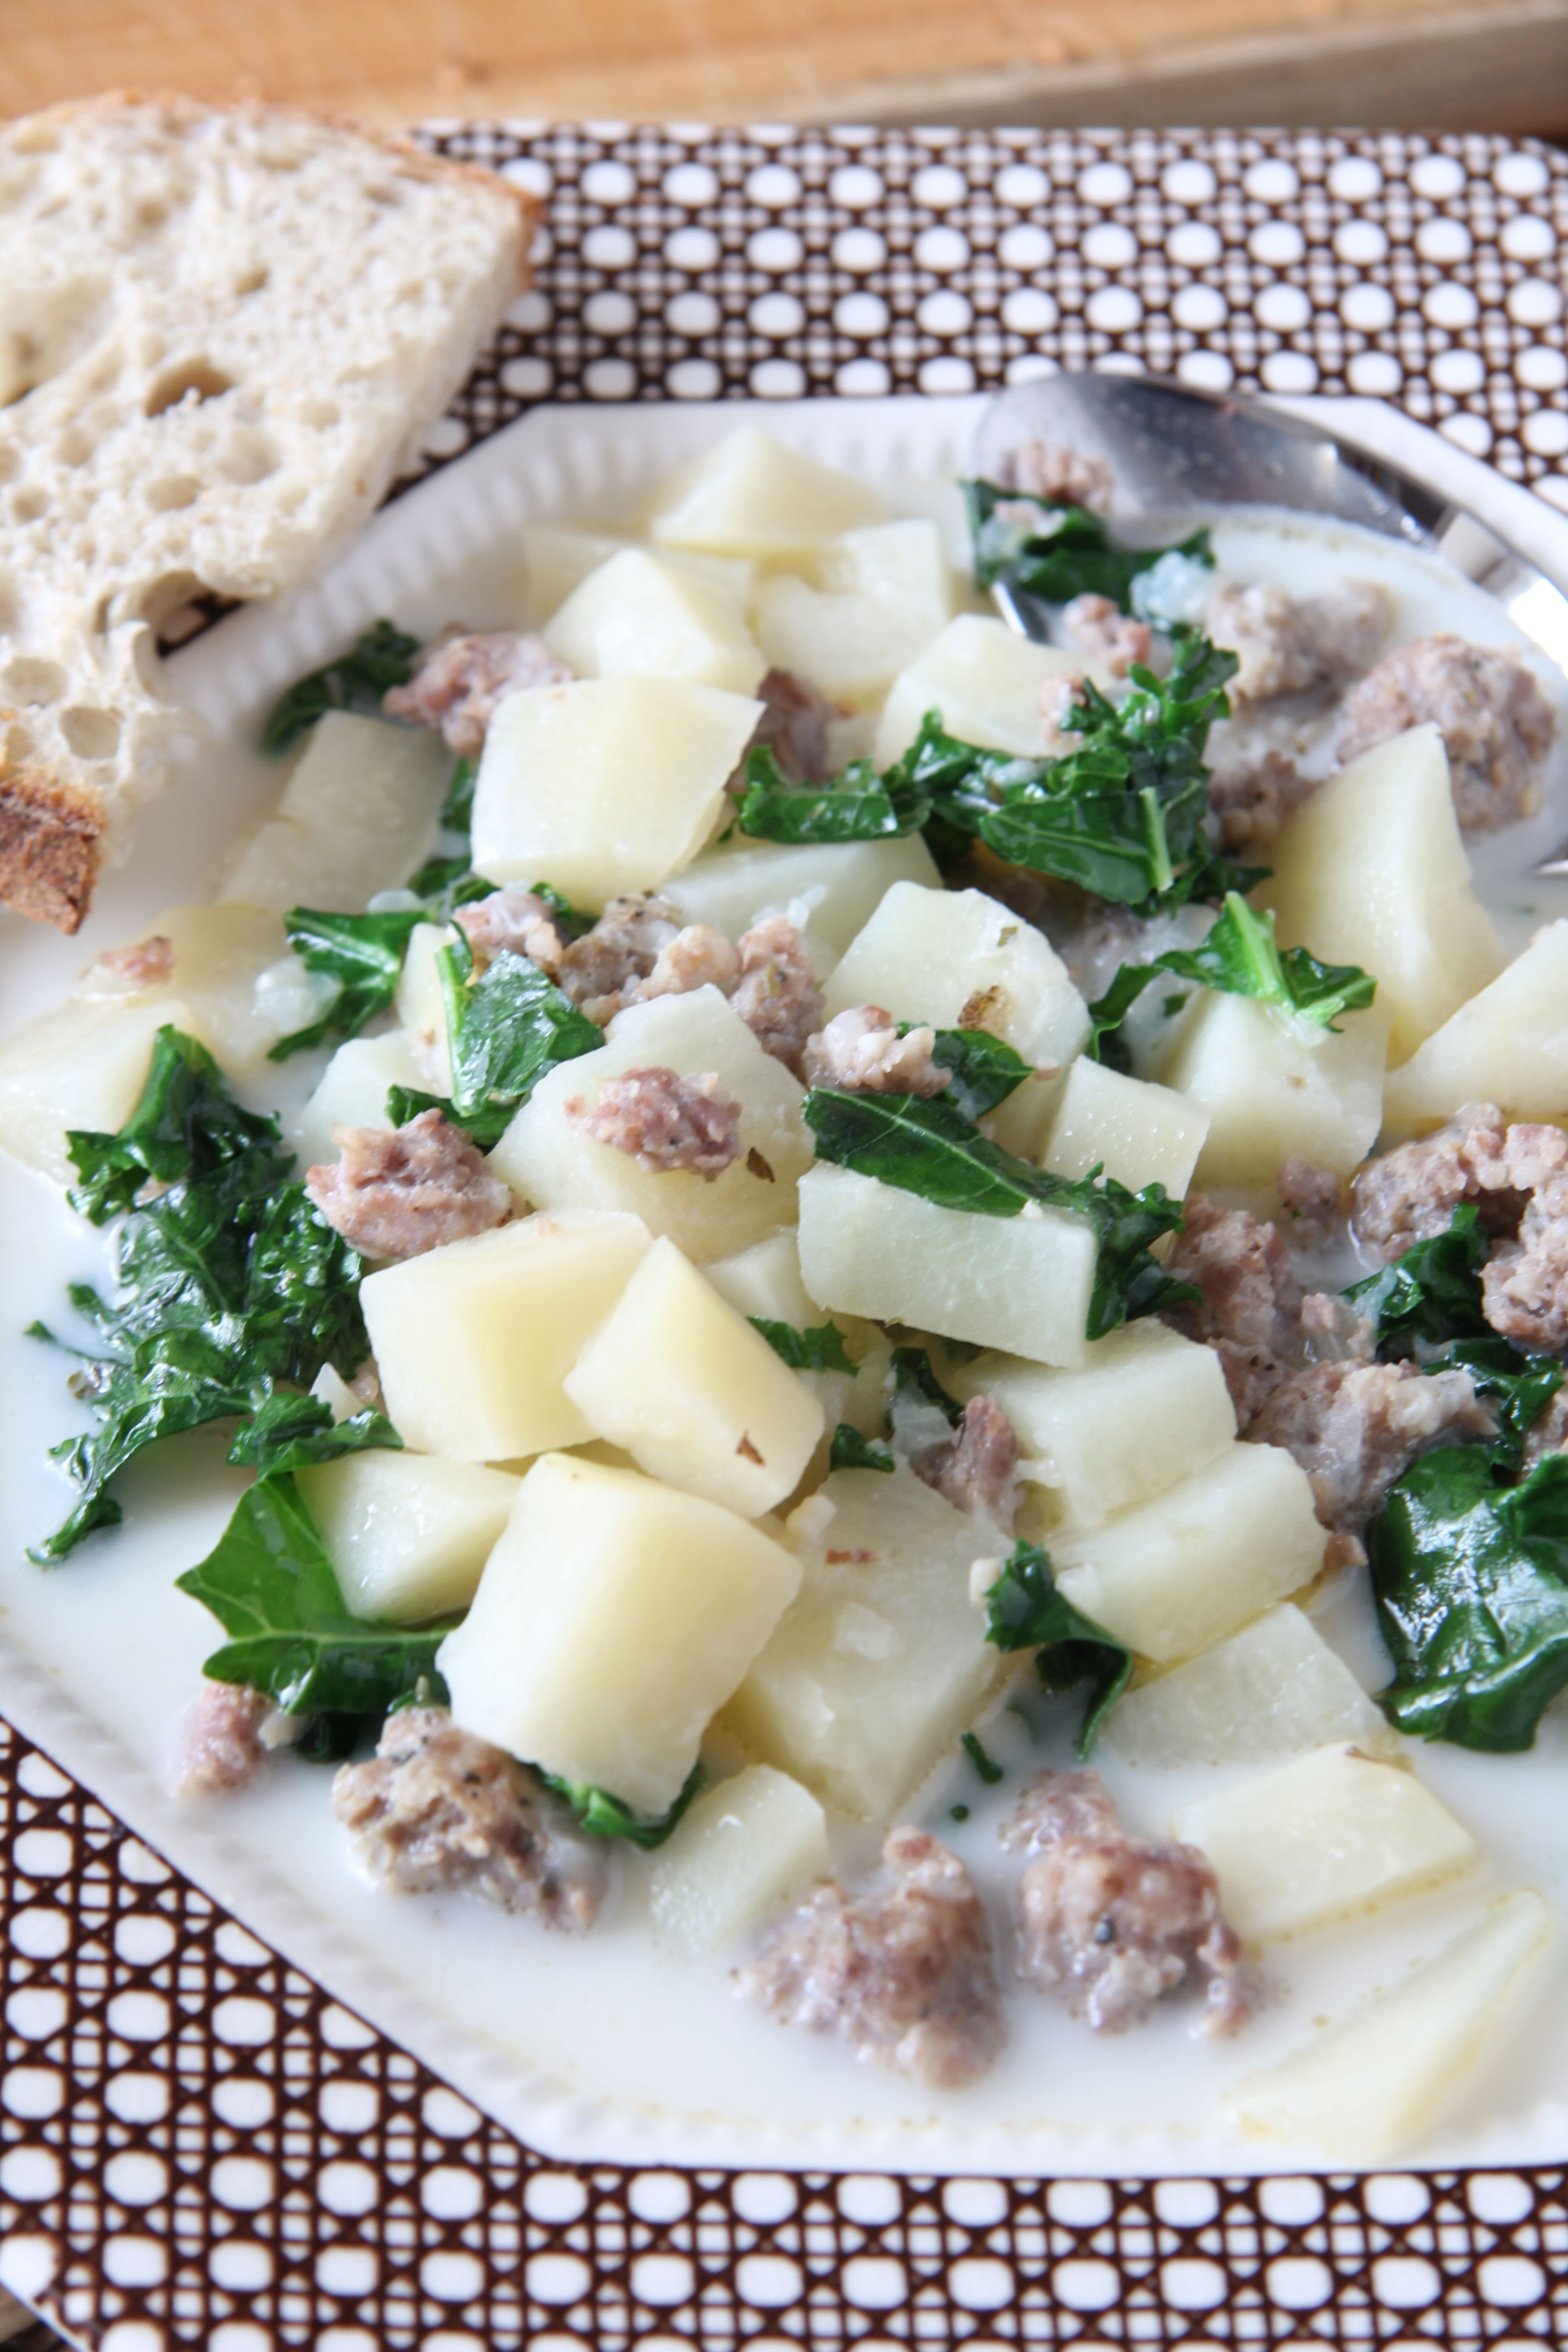 It is Slow Cooker season and Ridgely Brode tried a new recipe, Zuppa Toscana that is hearty, delicious and a perfect meal with fresh from the bakery bread!